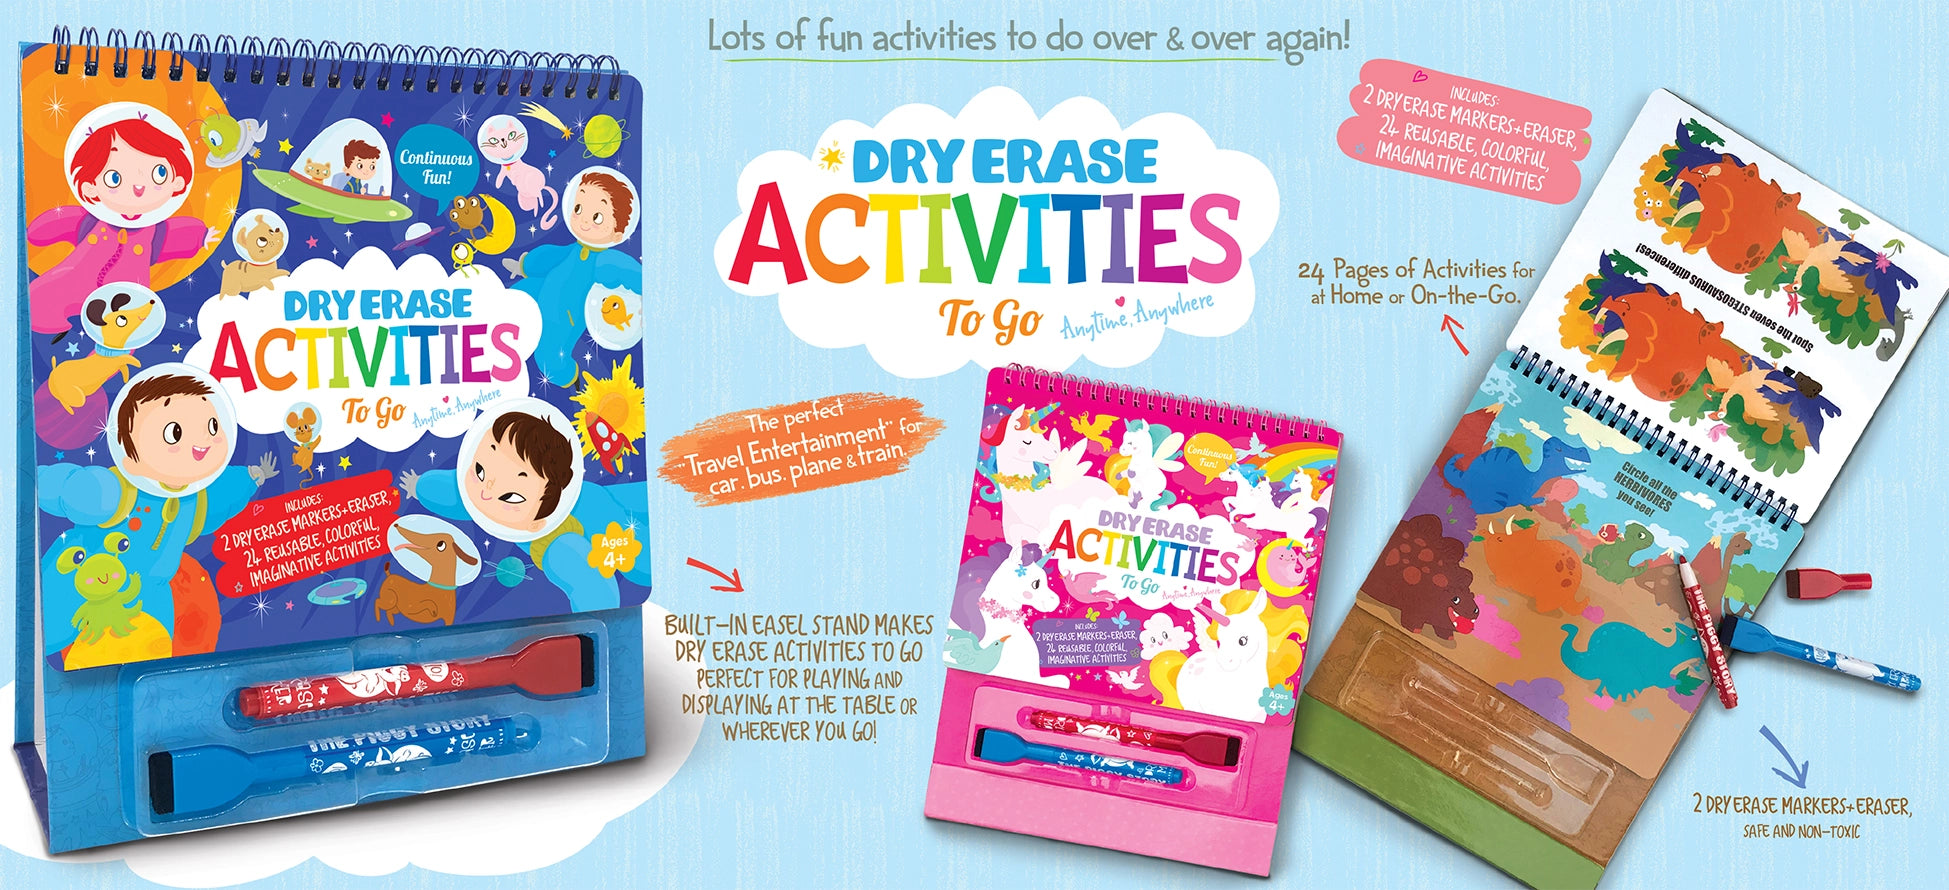 Dry Erase Activities To Go- Space Adventure - Twinkle Twinkle Little One